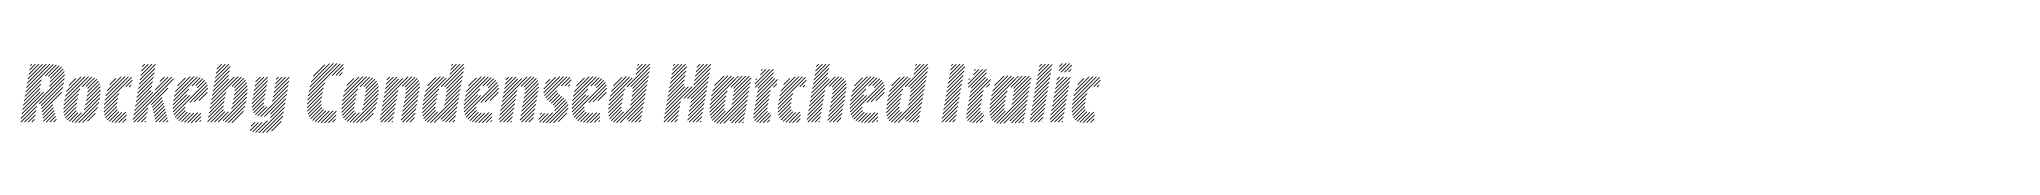 Rockeby Condensed Hatched Italic image